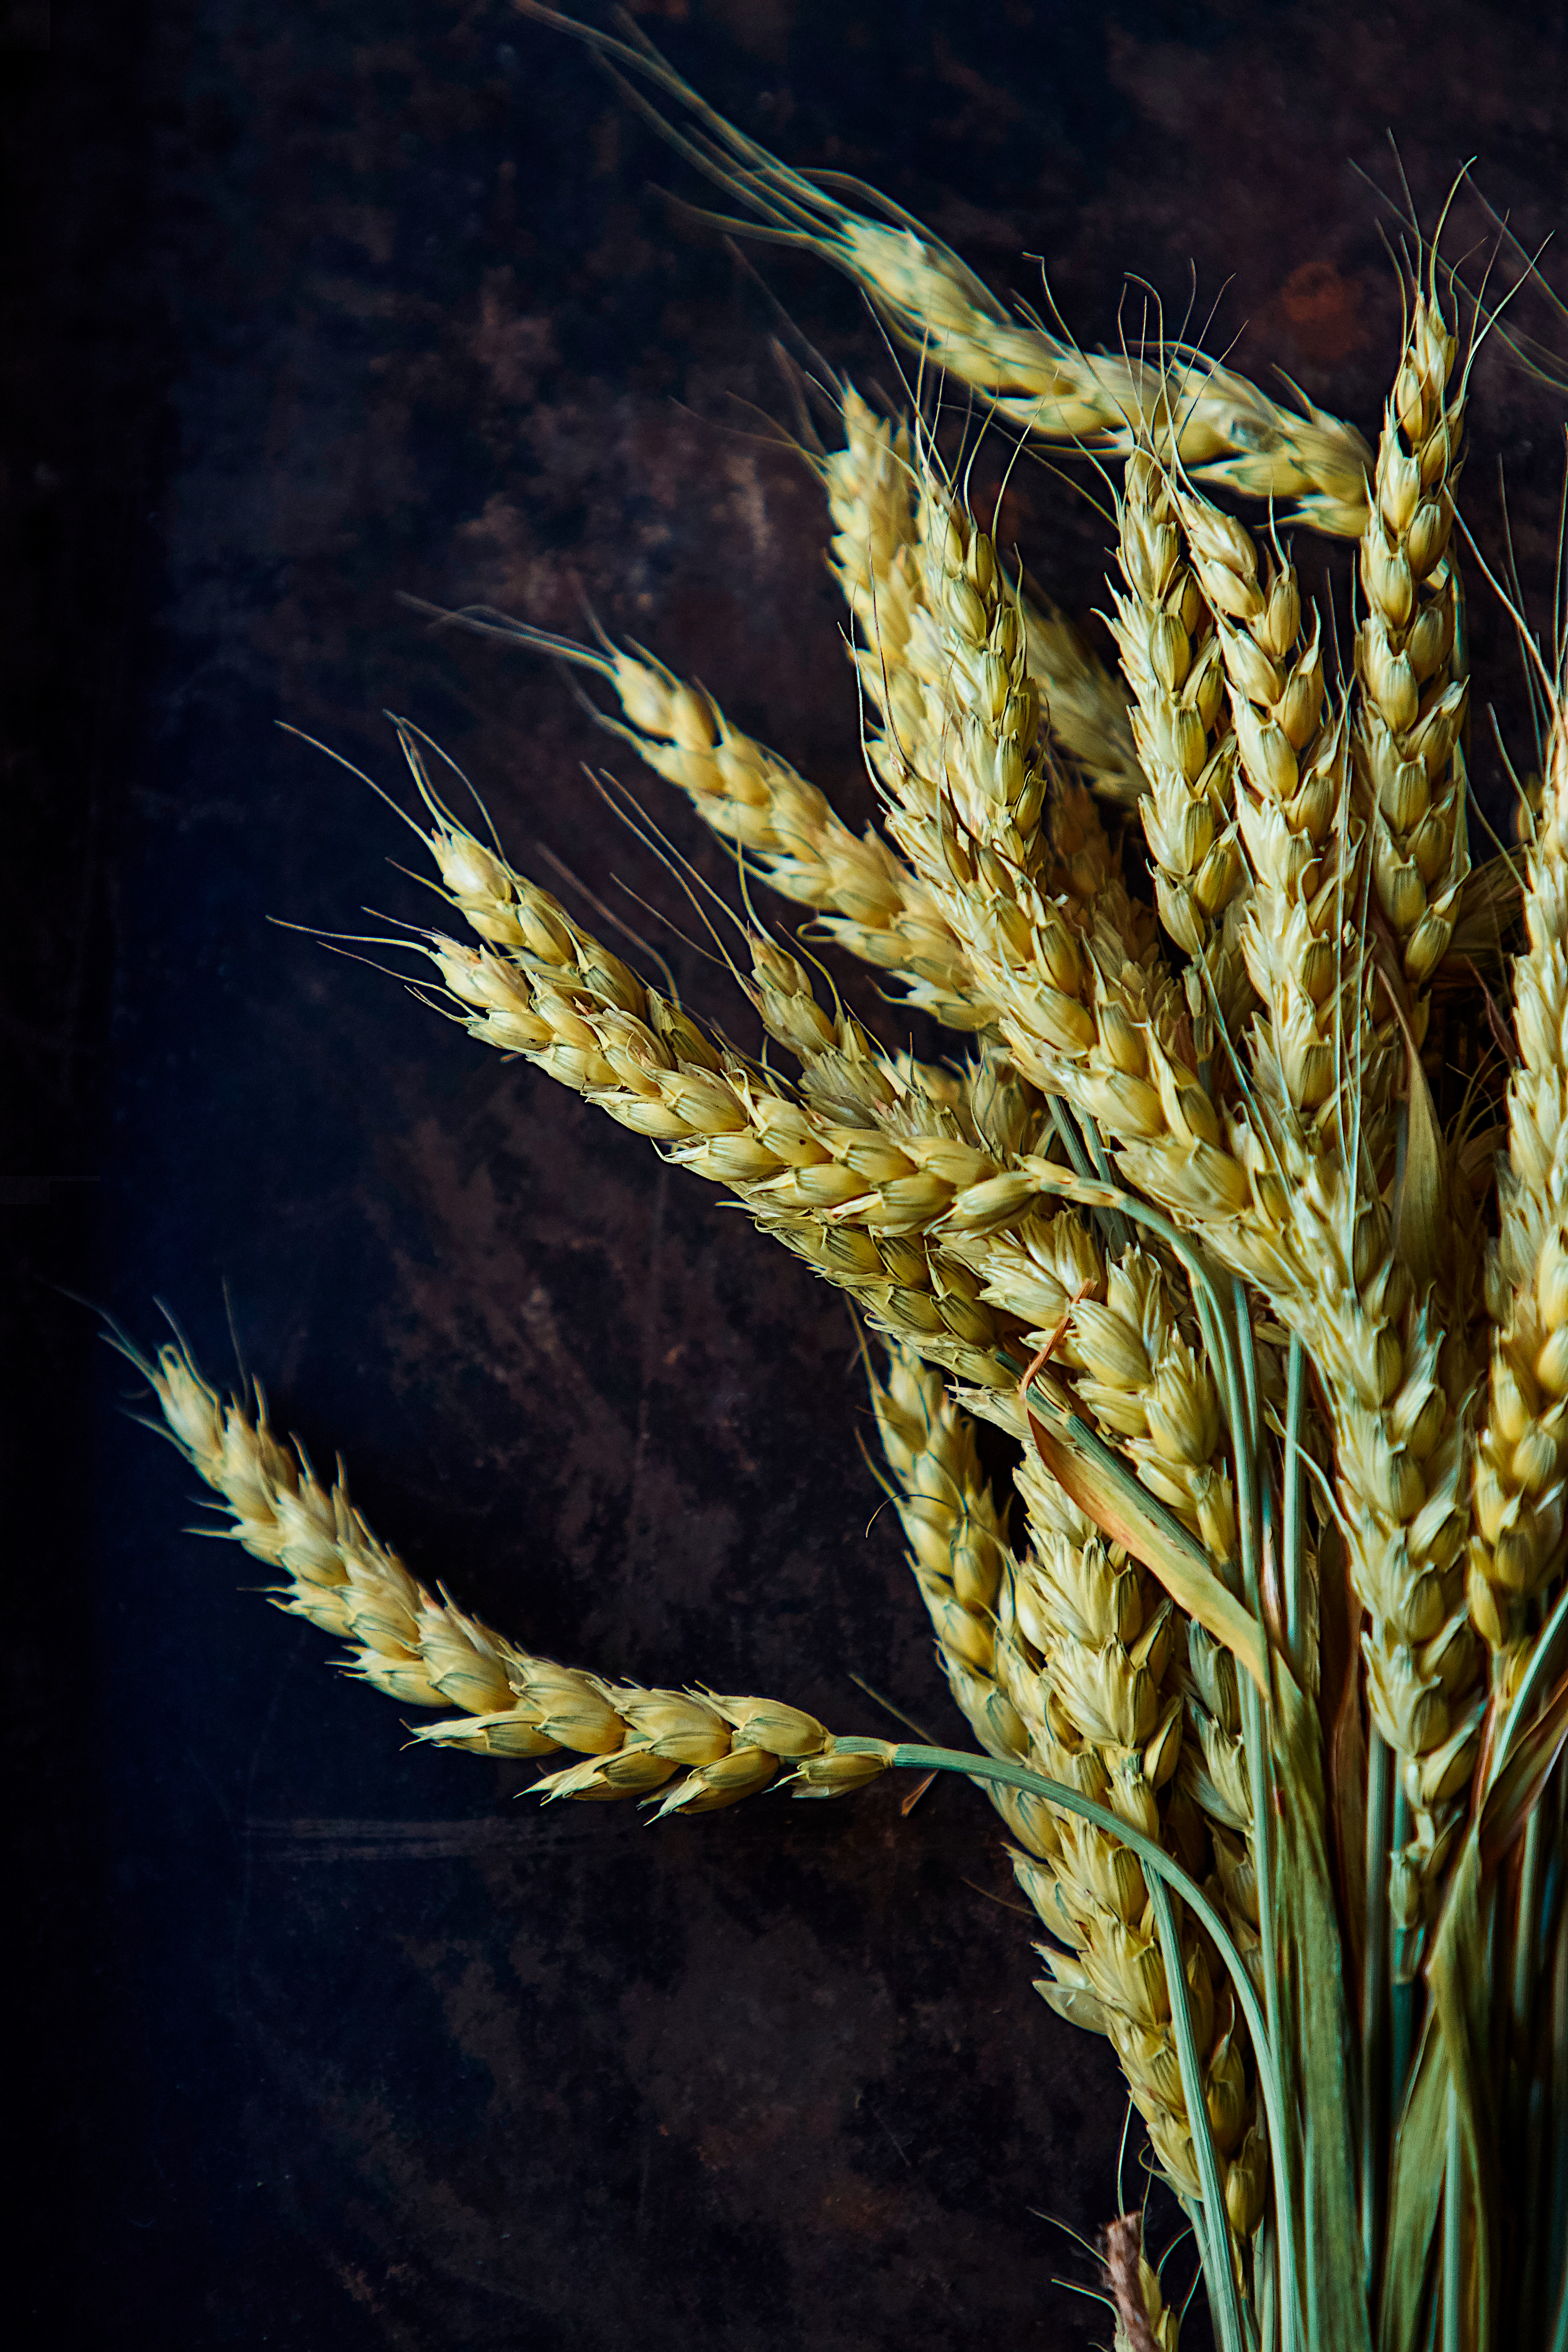 A picture of bread spikelets